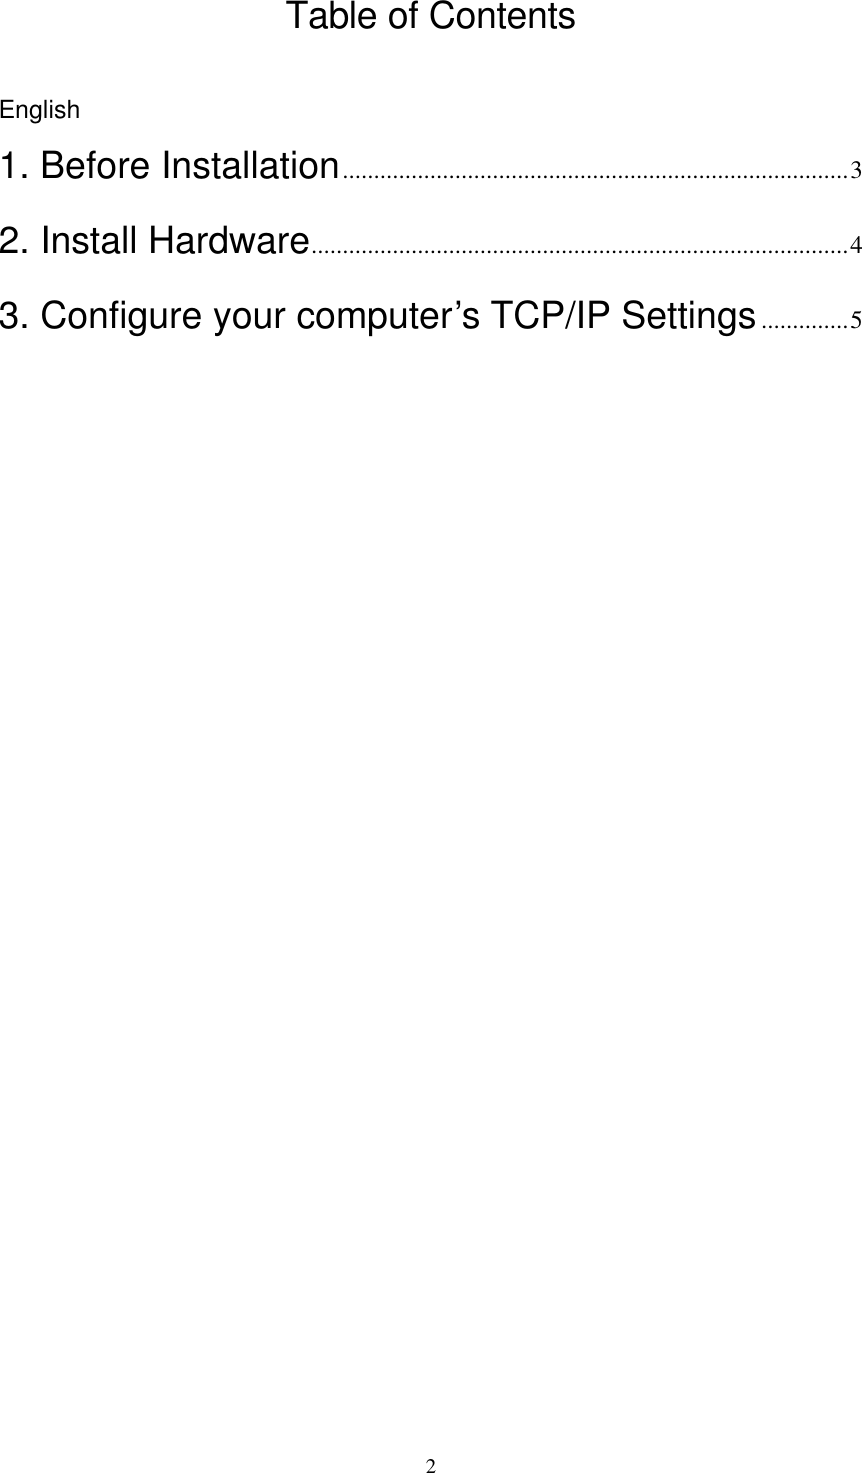  2Table of Contents  English 1. Before Installation.................................................................................3 2. Install Hardware......................................................................................4 3. Configure your computer’s TCP/IP Settings..............5                             